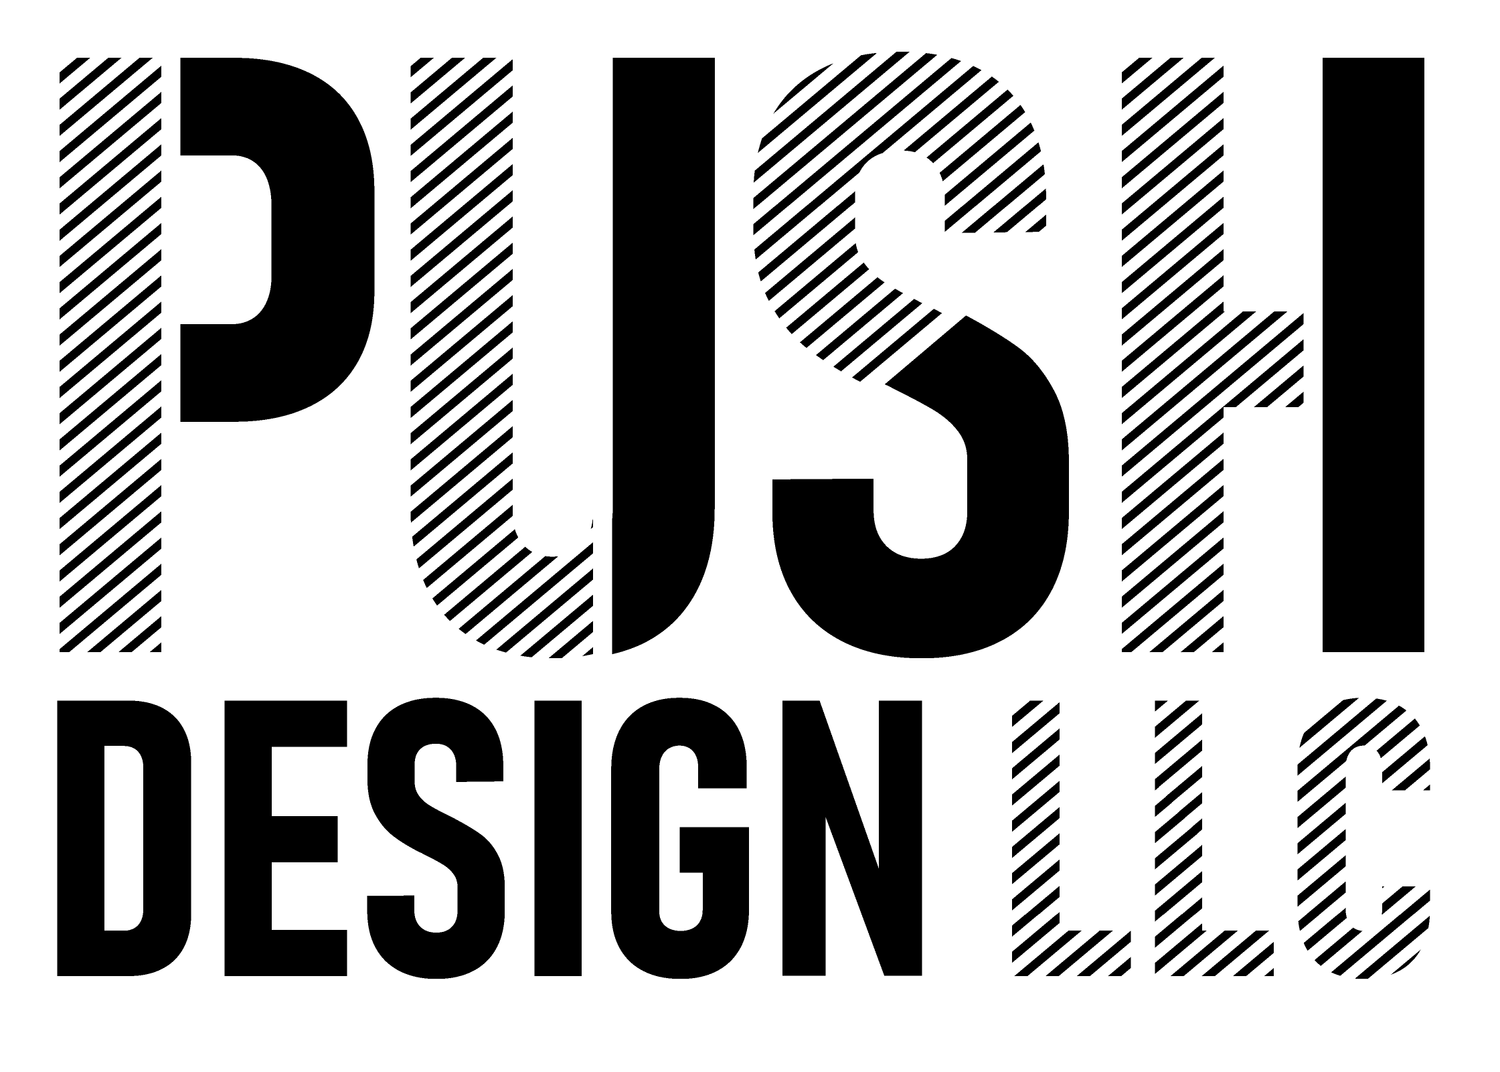 Push Design LLC :: Architecture and design firm in Detroit. We specialize in universal design as it relates to architecture and design.